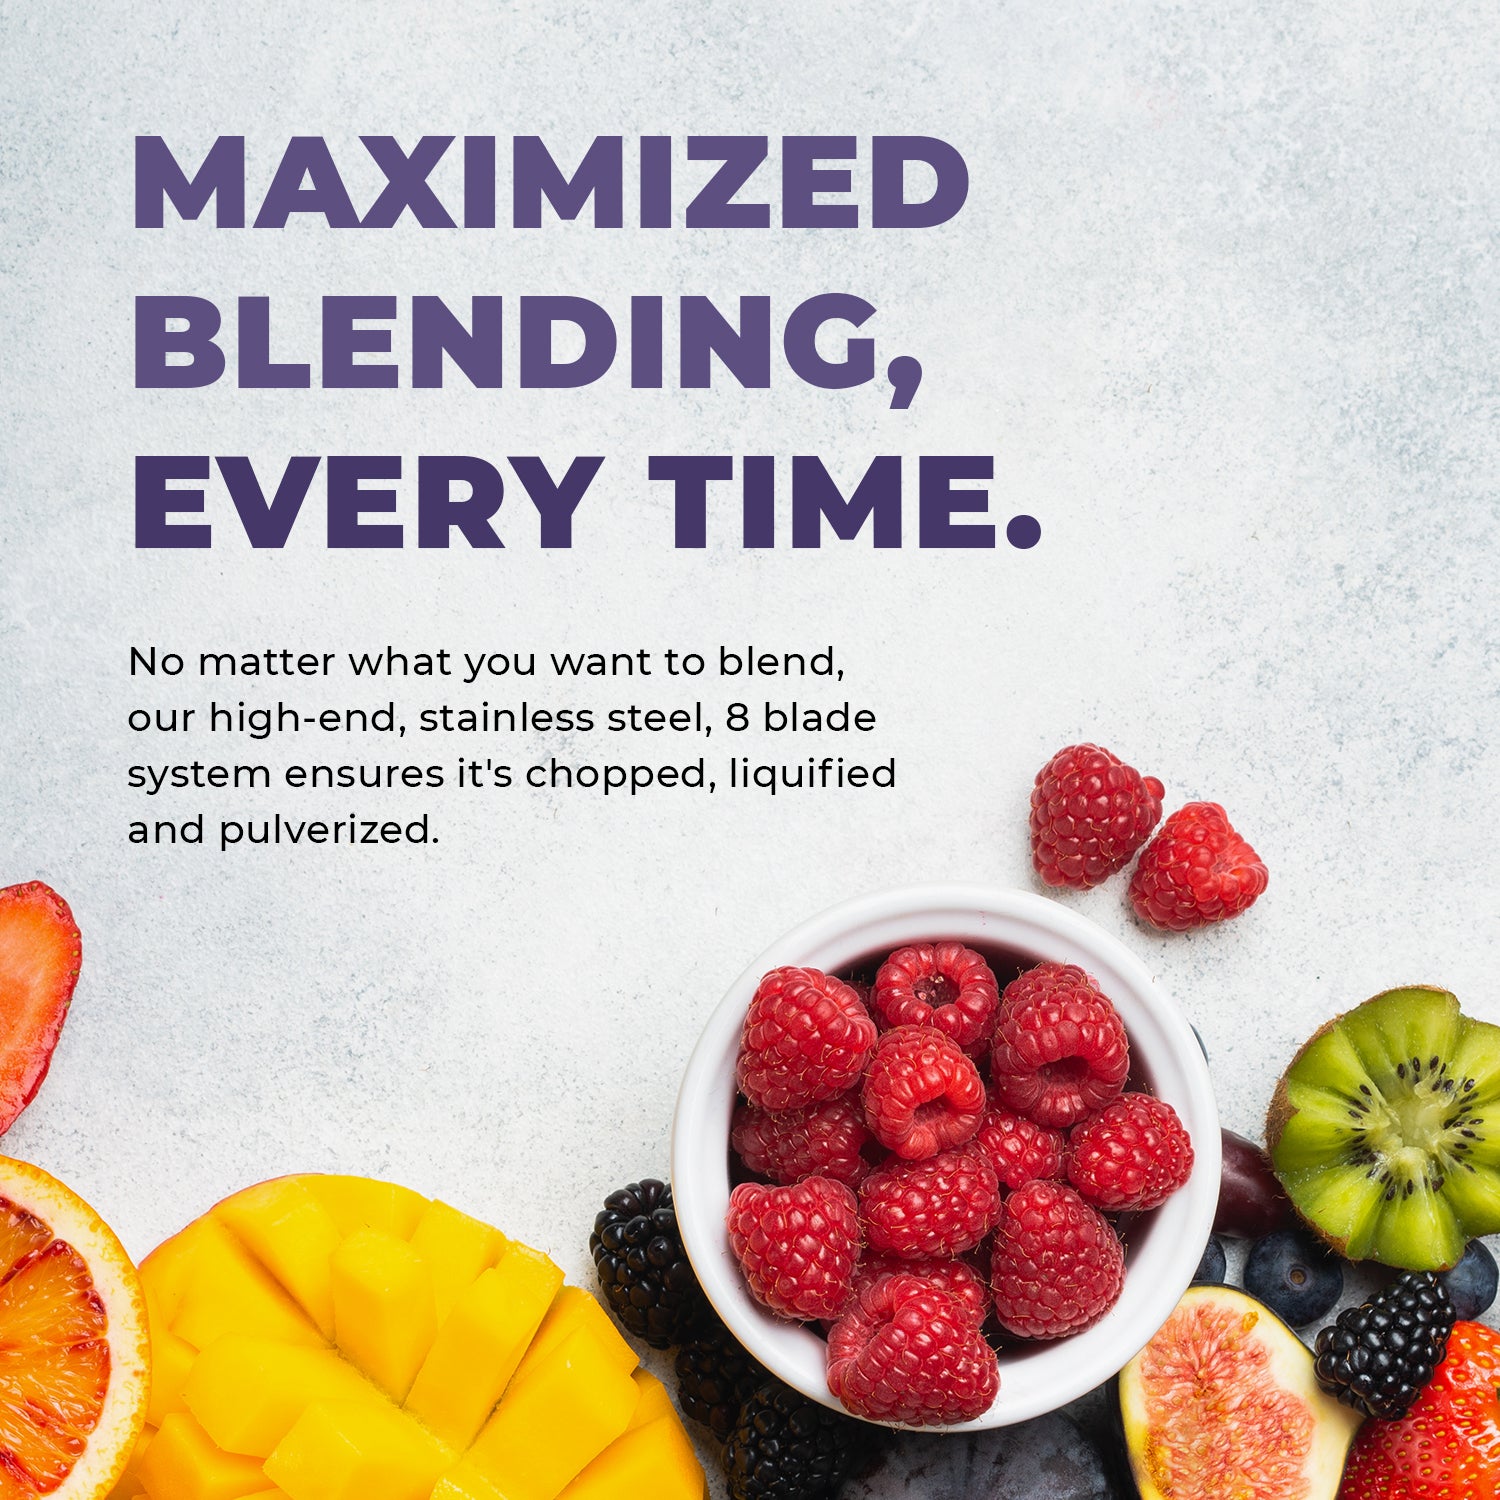 Smoothie blender: Blend your way to a healthier lifestyle with the